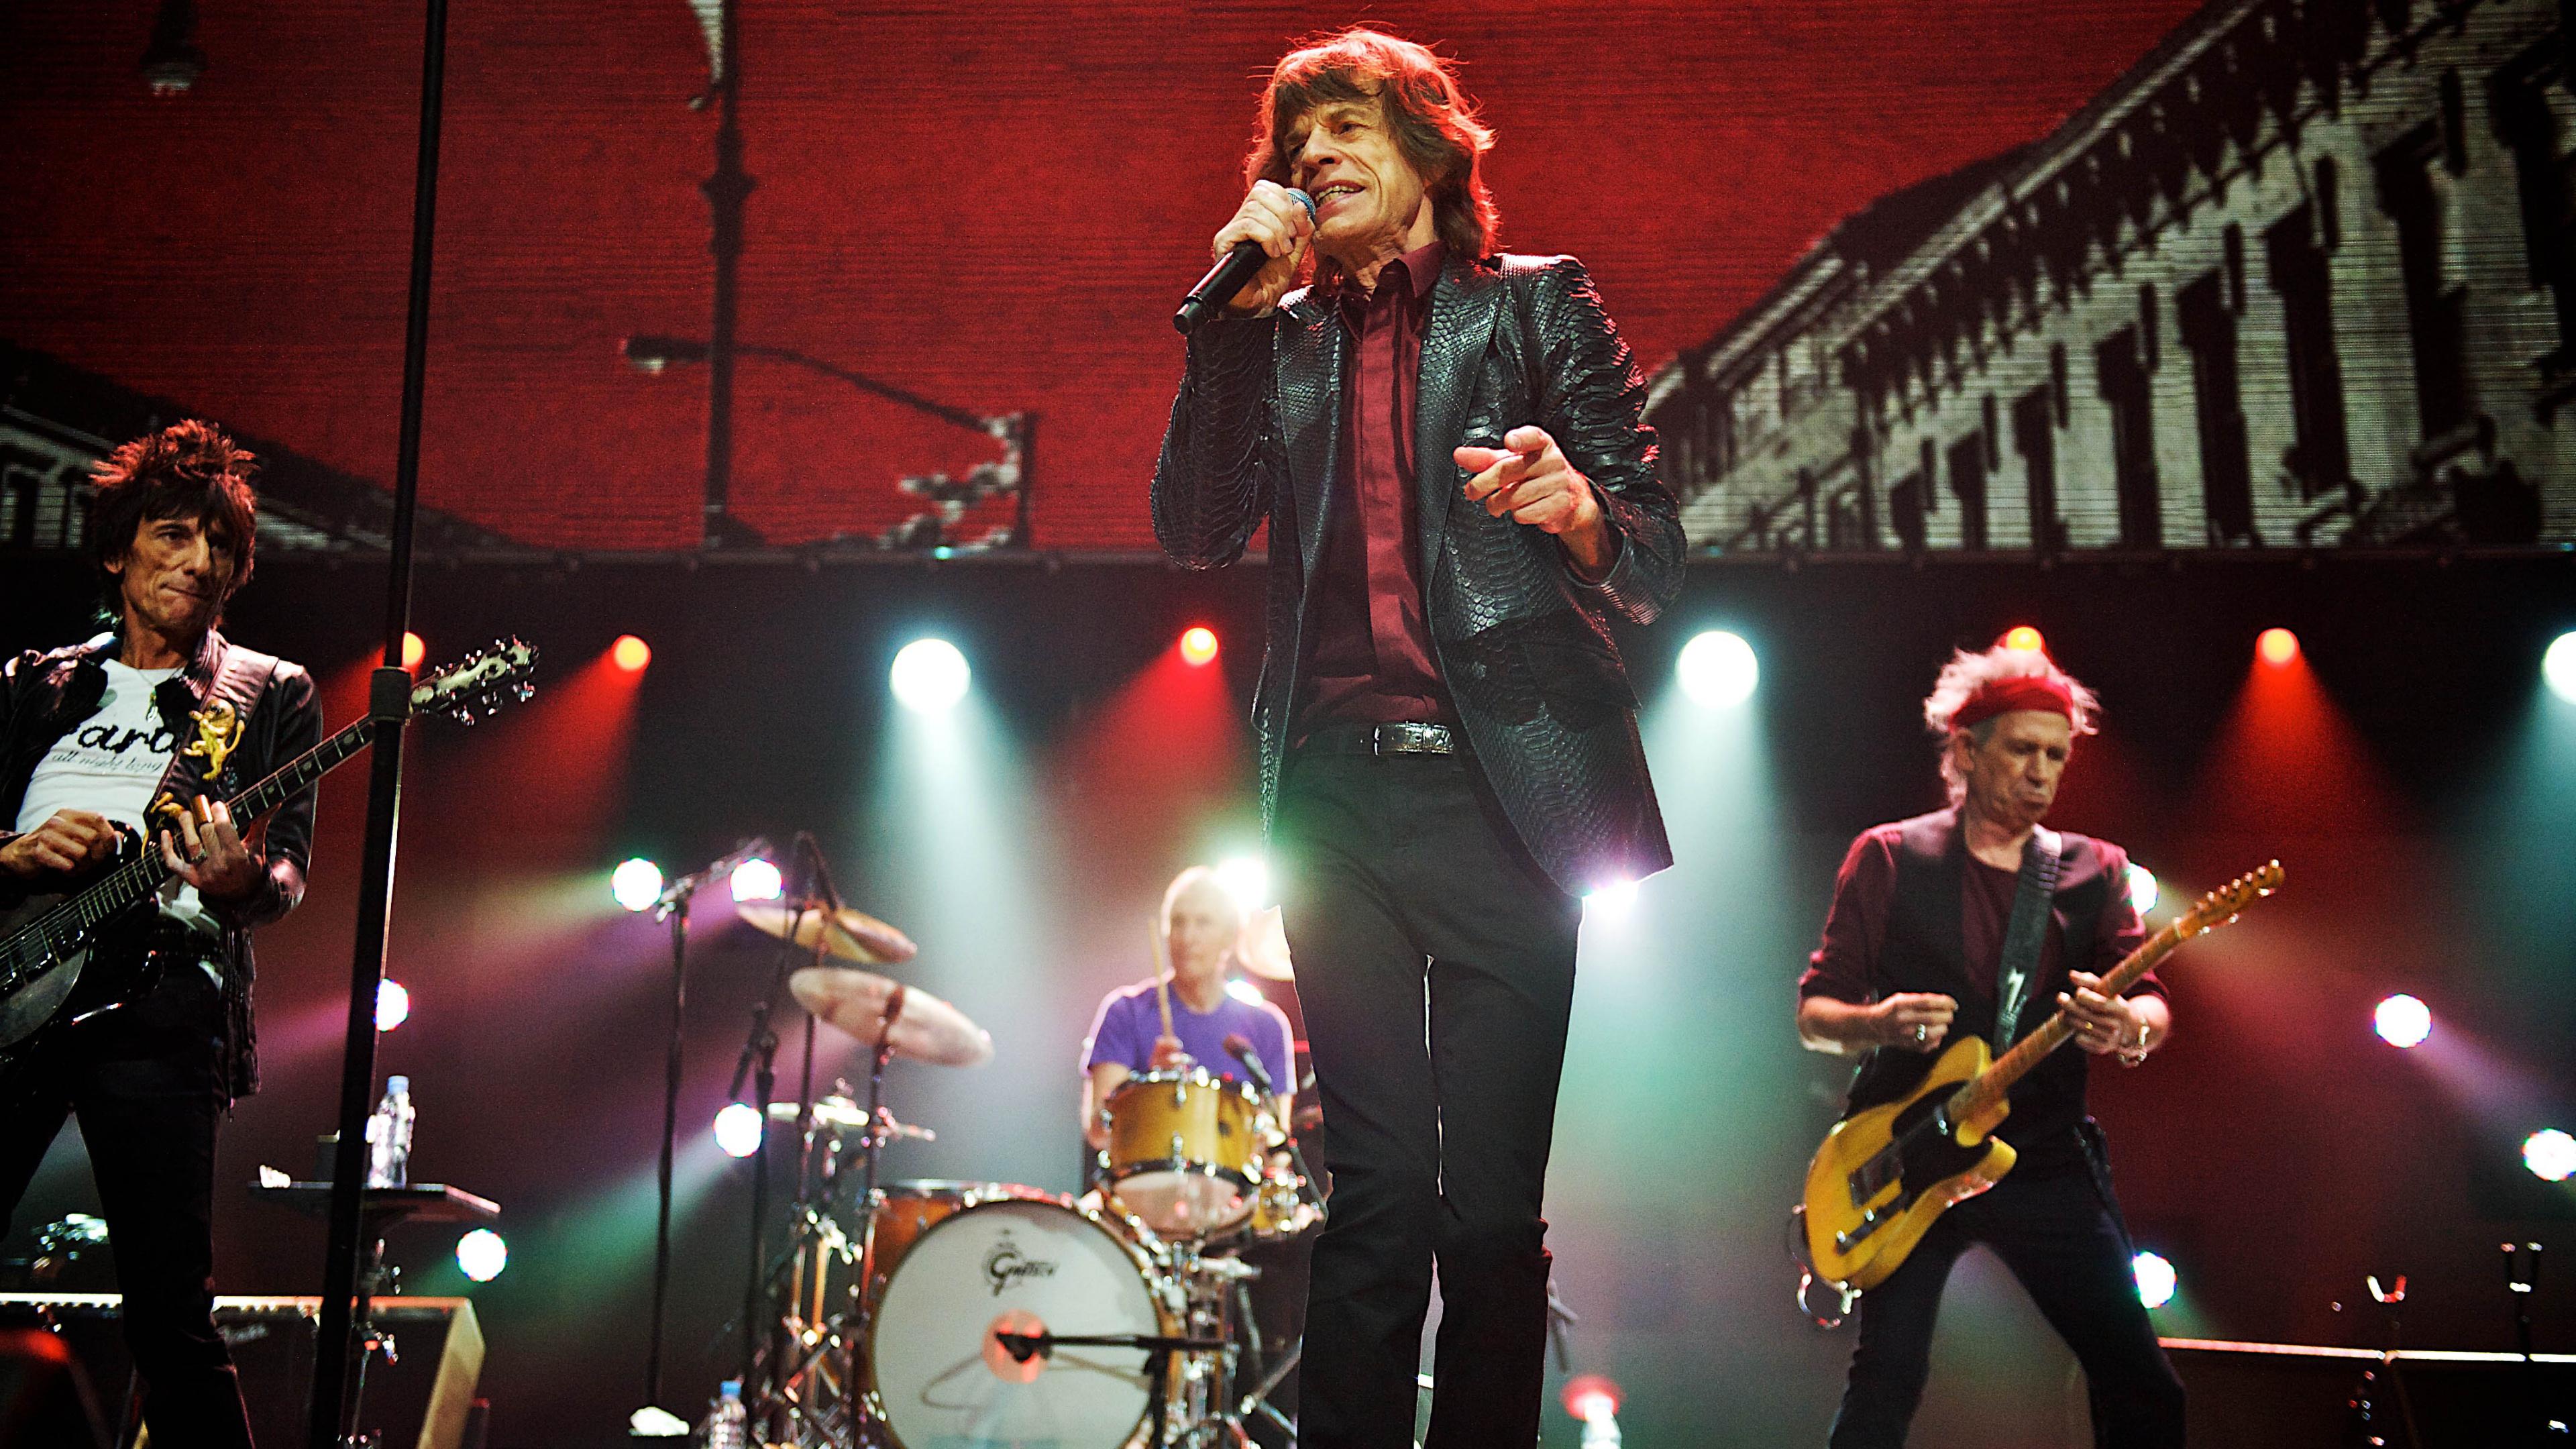 Concert: Rolling Stones, Mick Jagger, An English singer, songwriter, actor, and film producer. 3840x2160 4K Wallpaper.